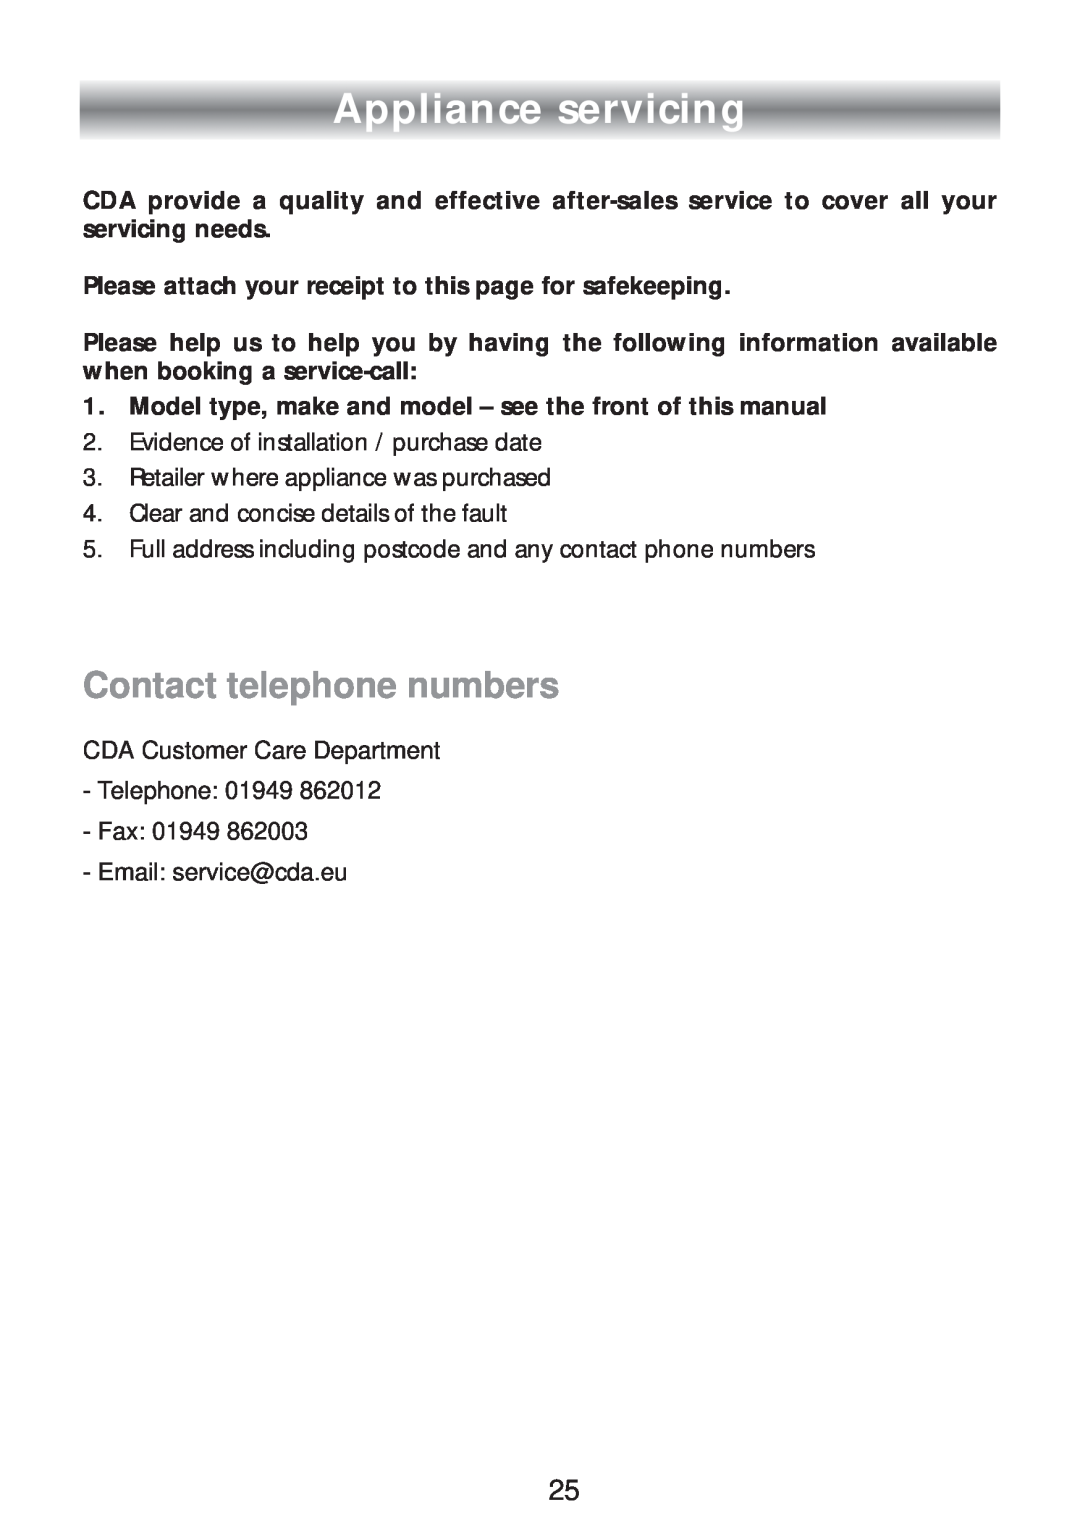 CDA SC309 manual Appliance servicing, Contact telephone numbers 